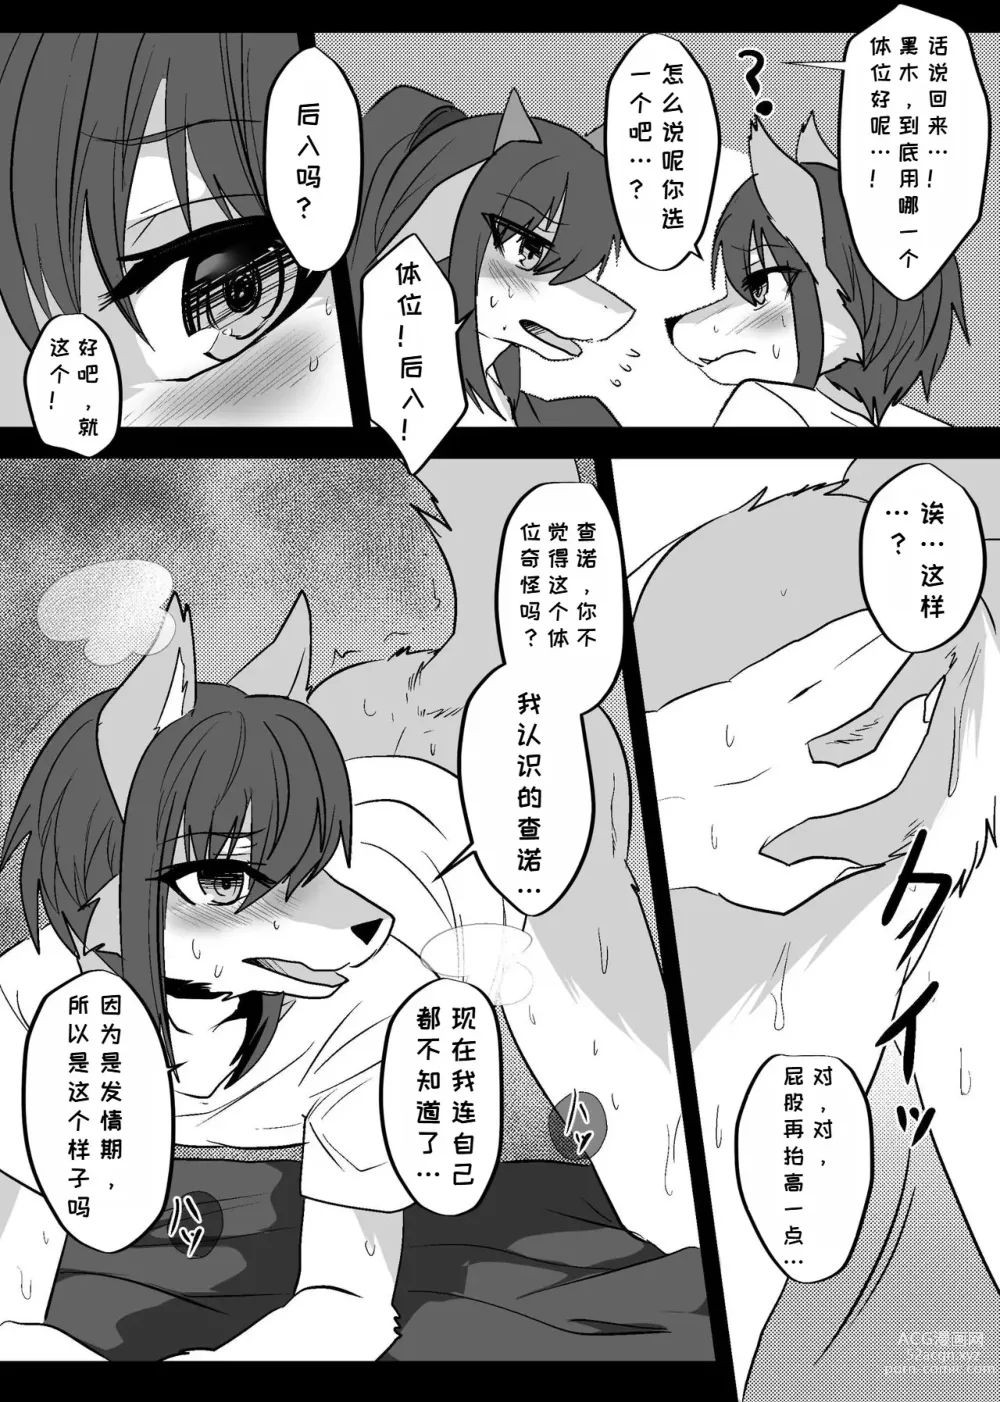 Page 53 of doujinshi 我们发情出勤科 2